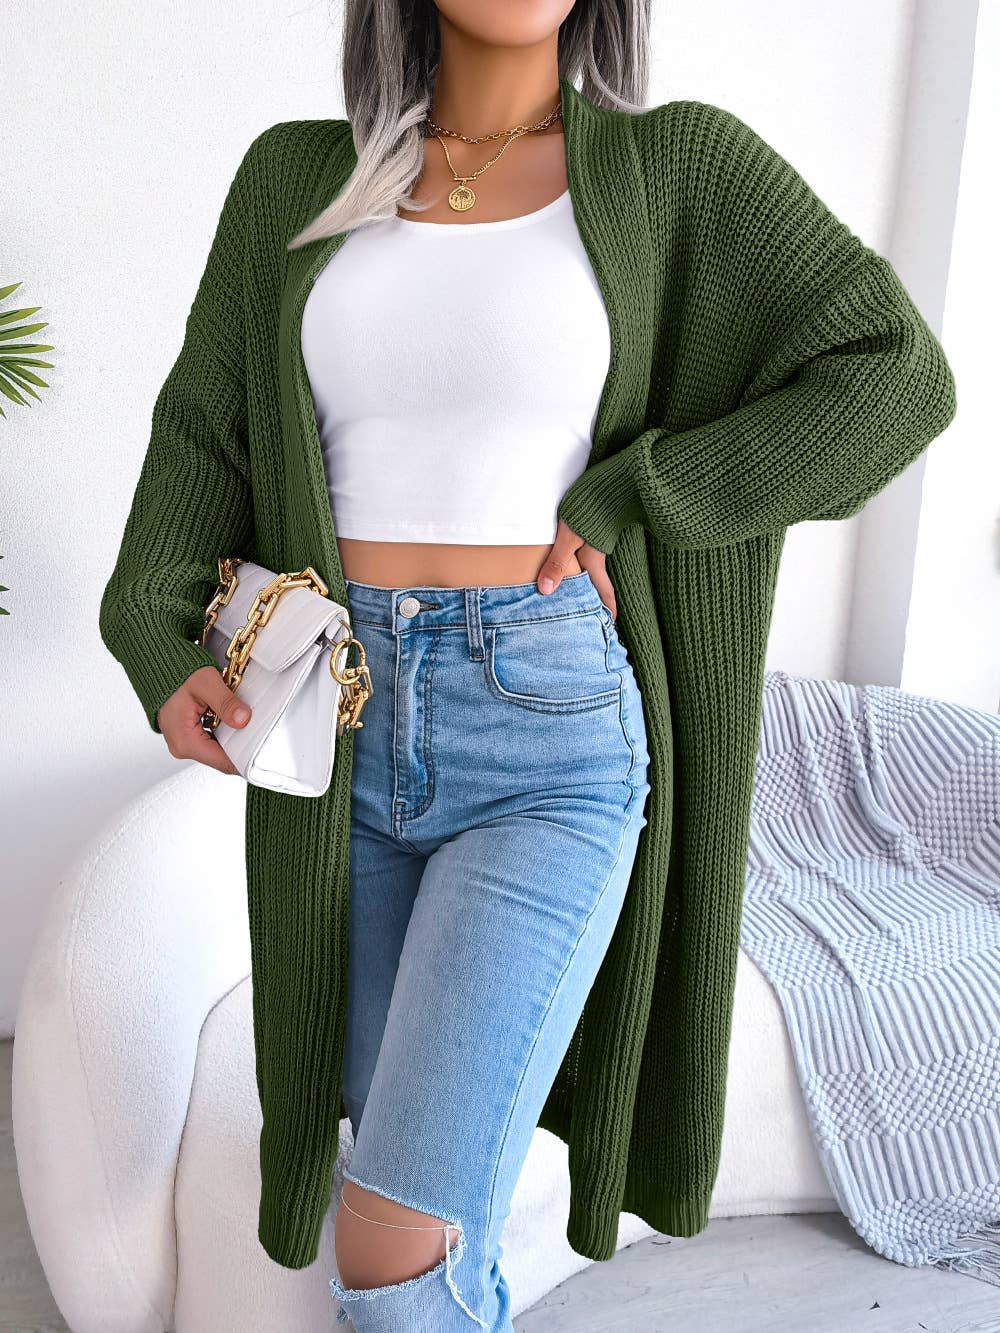 Why a Lightweight Cardigan in a Must for Summer - Sydne Style